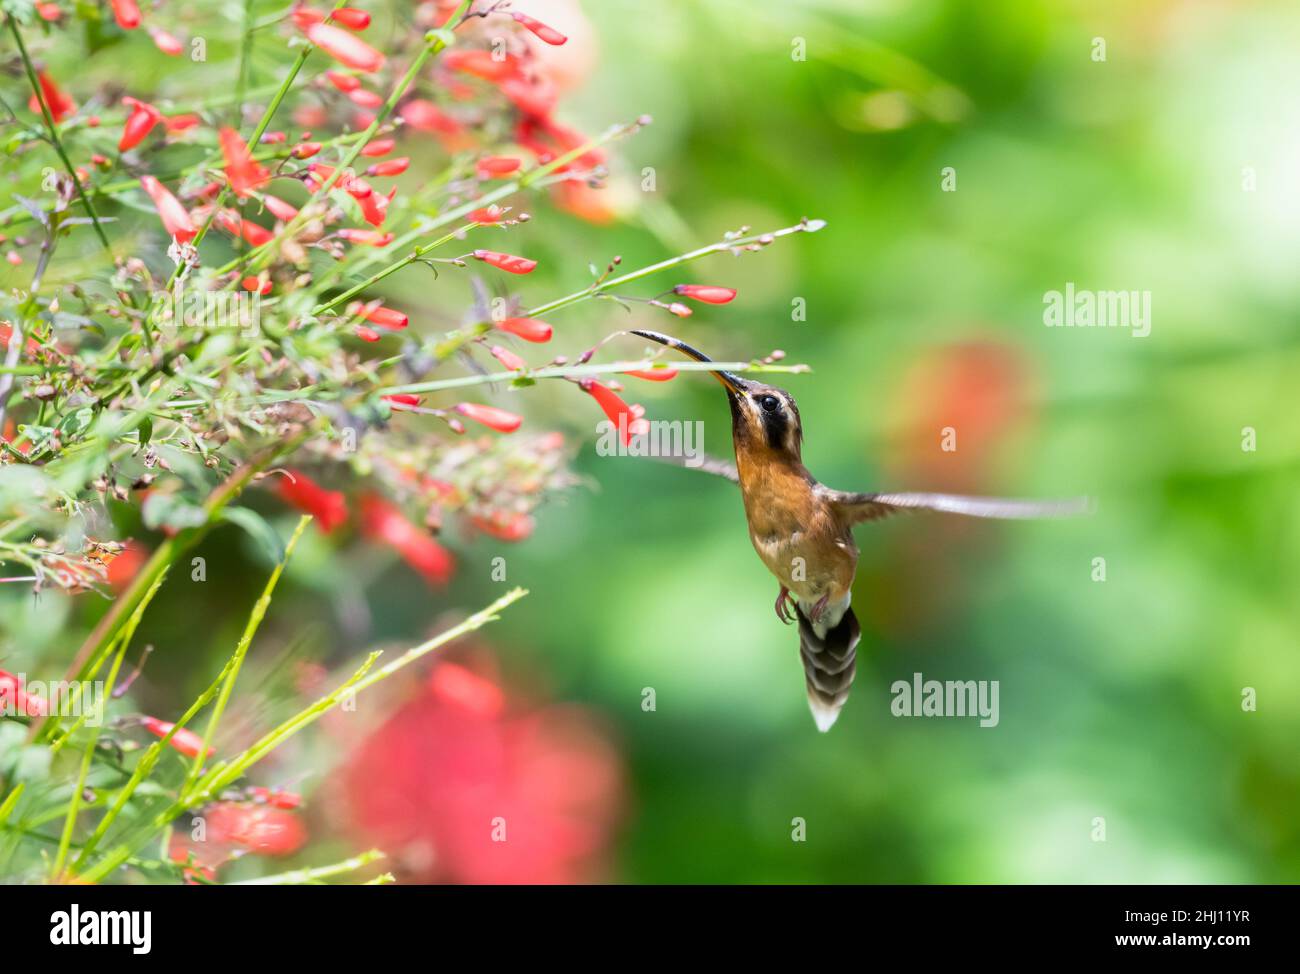 Little Hermit hummingbird feeding on red flowers in a tropical garden with green foliage blurred in the background. Stock Photo